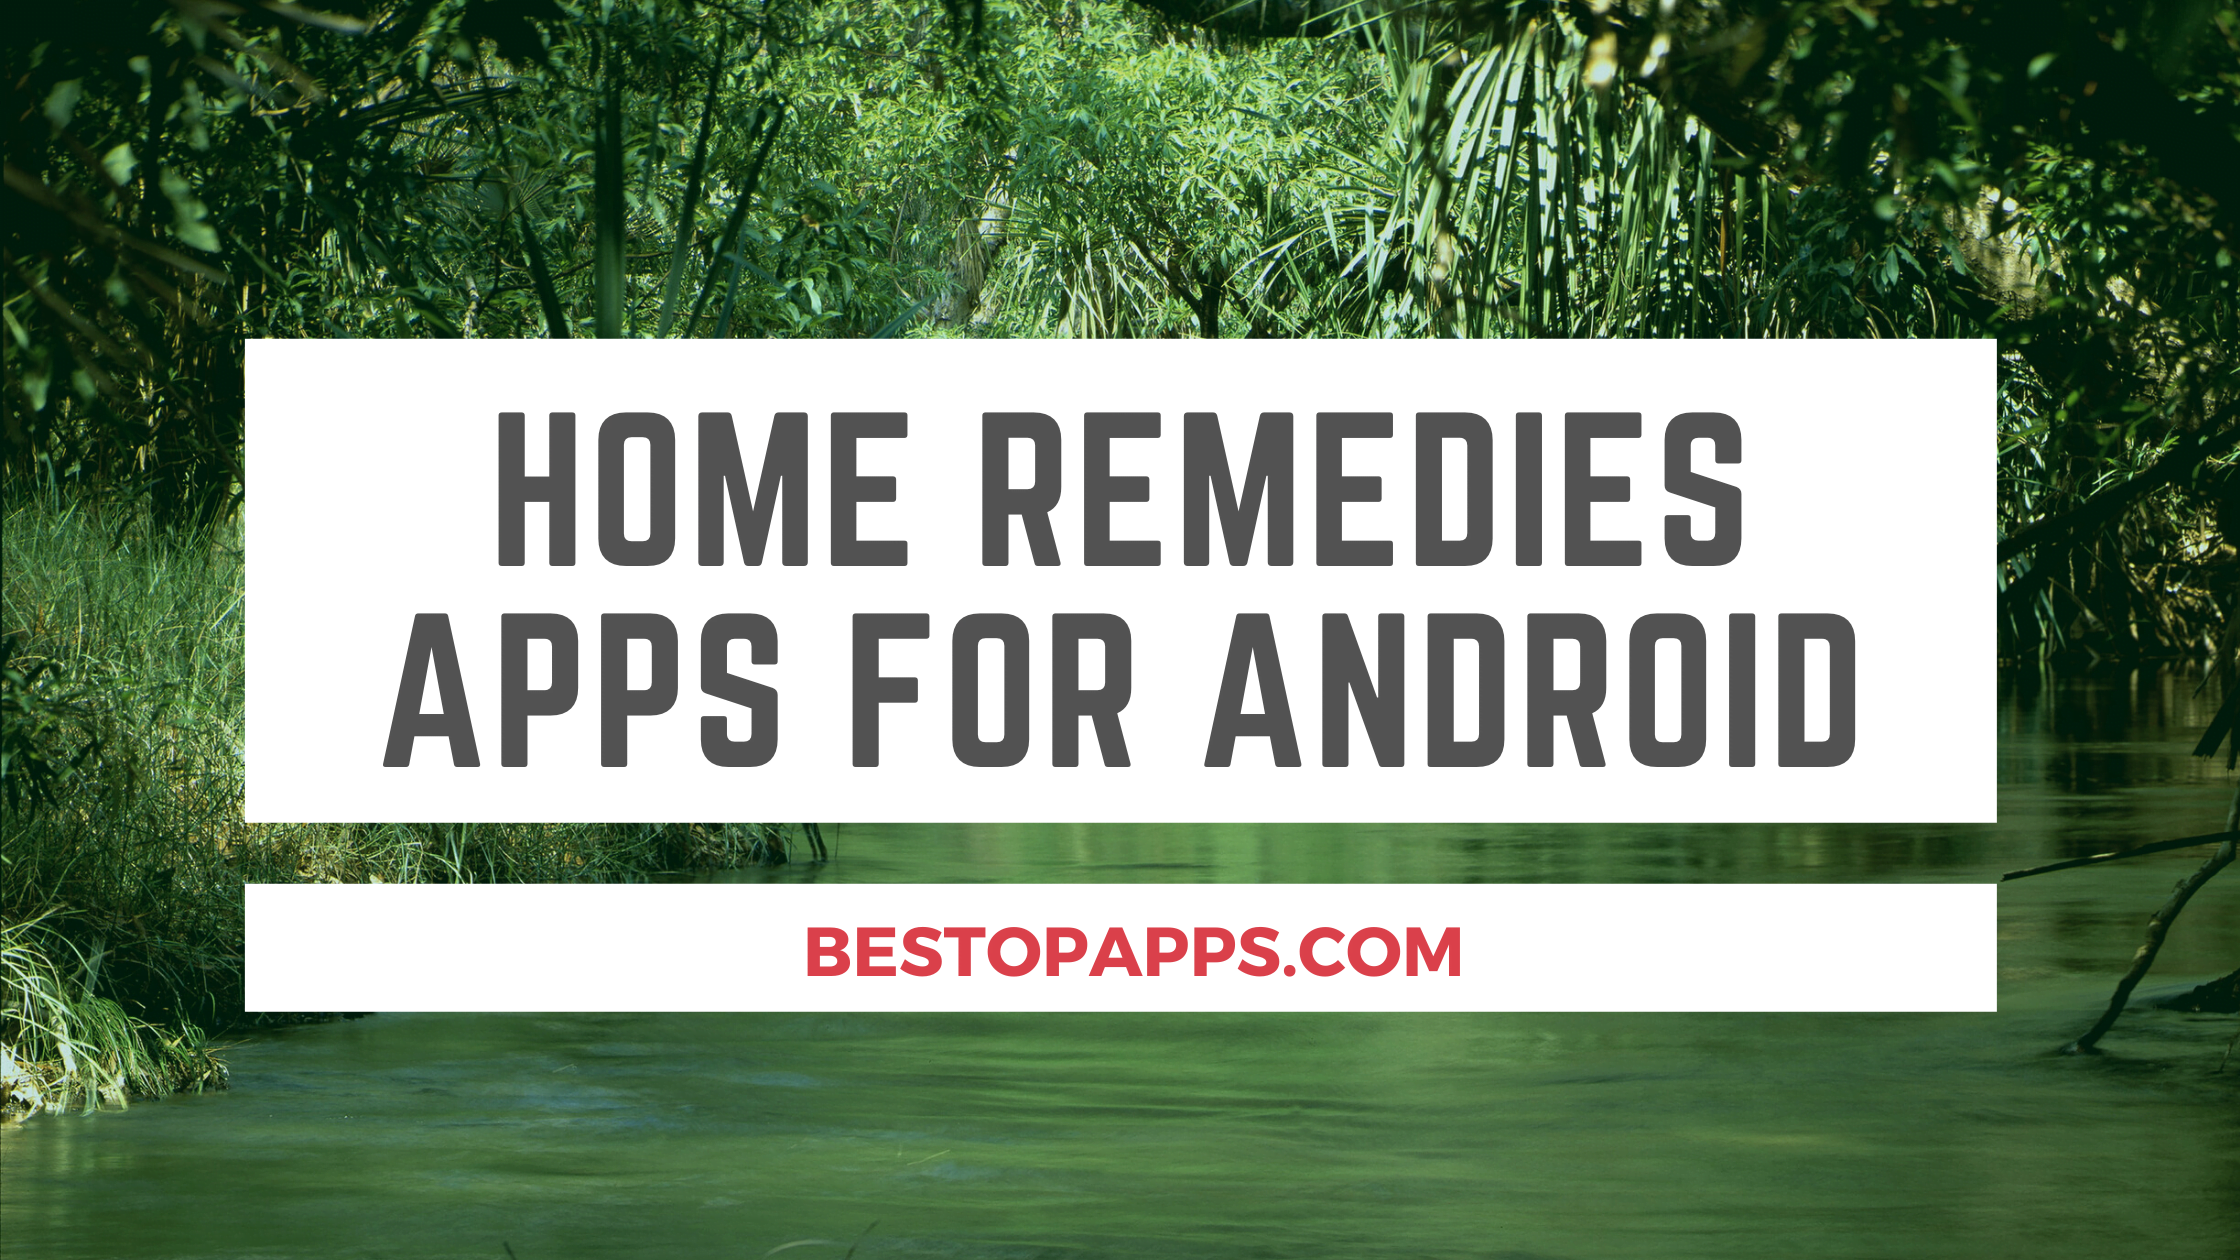 Home Remedies Apps for Android